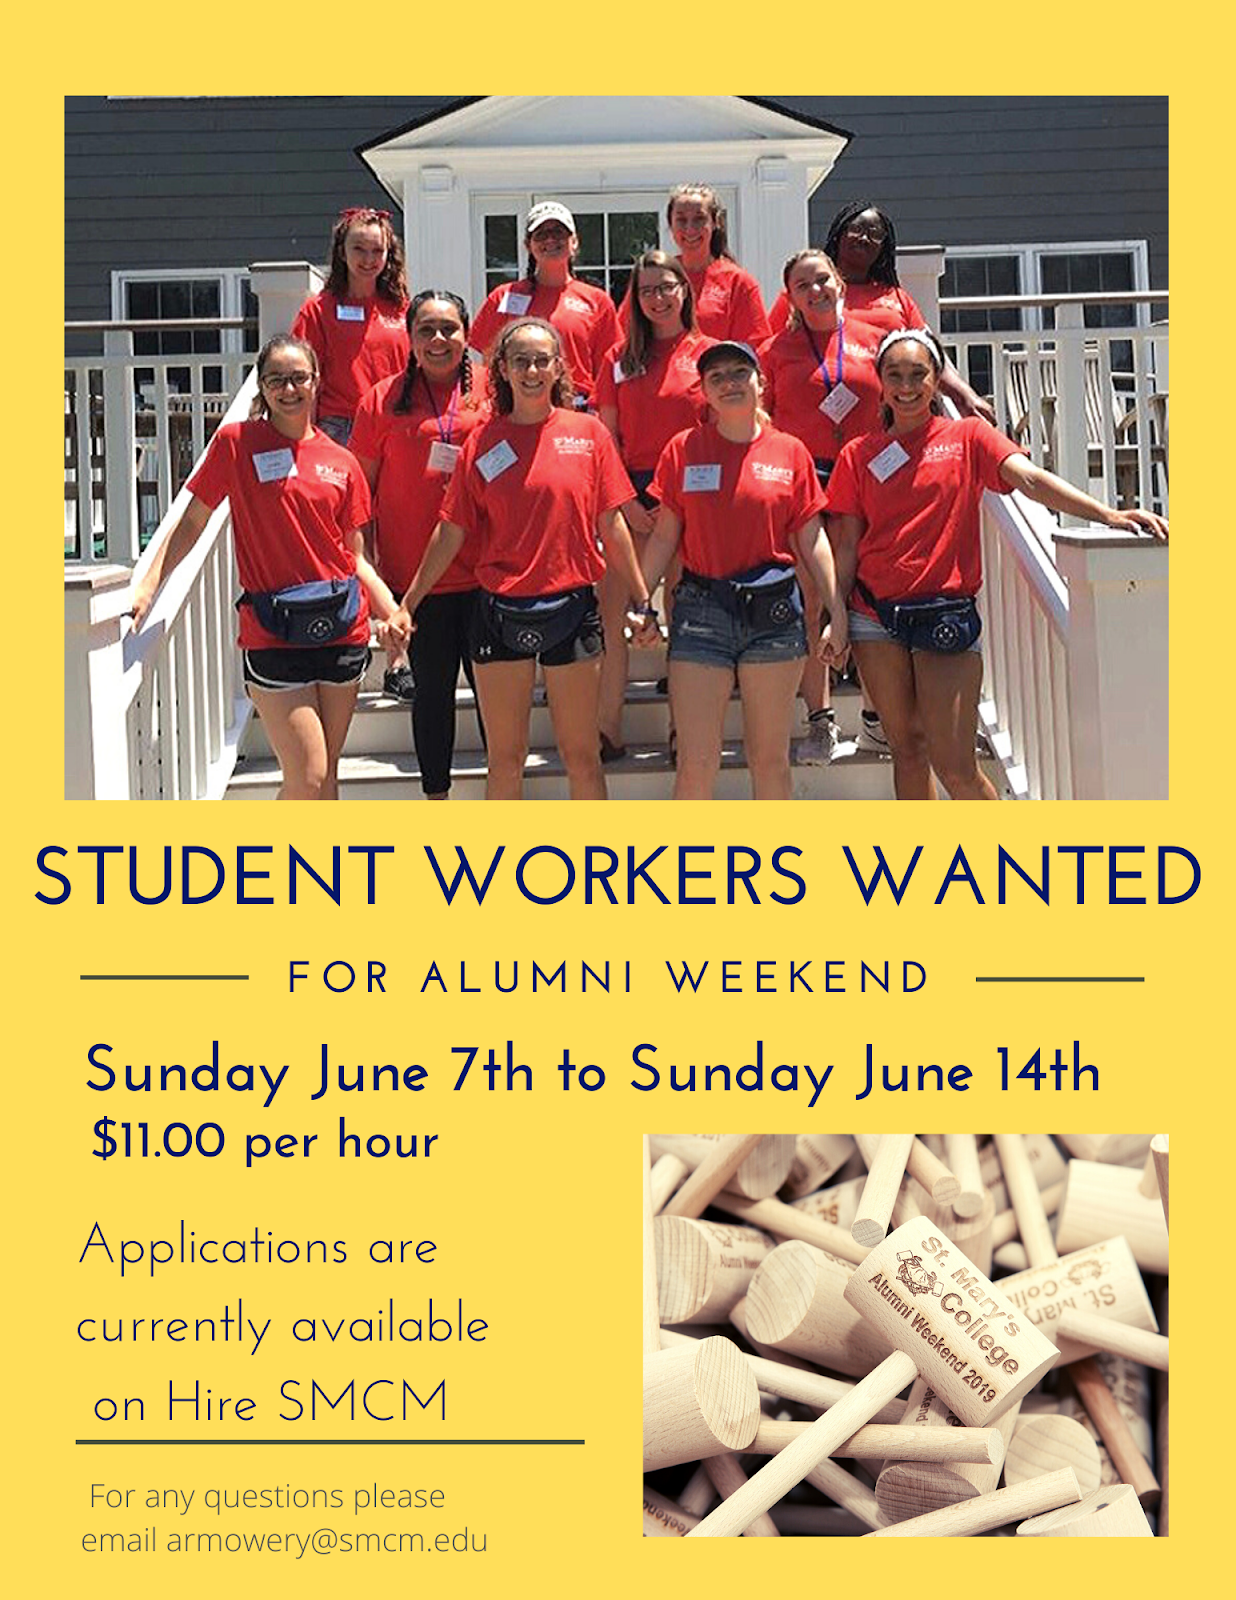 Alumni Weekend jobs available for students.